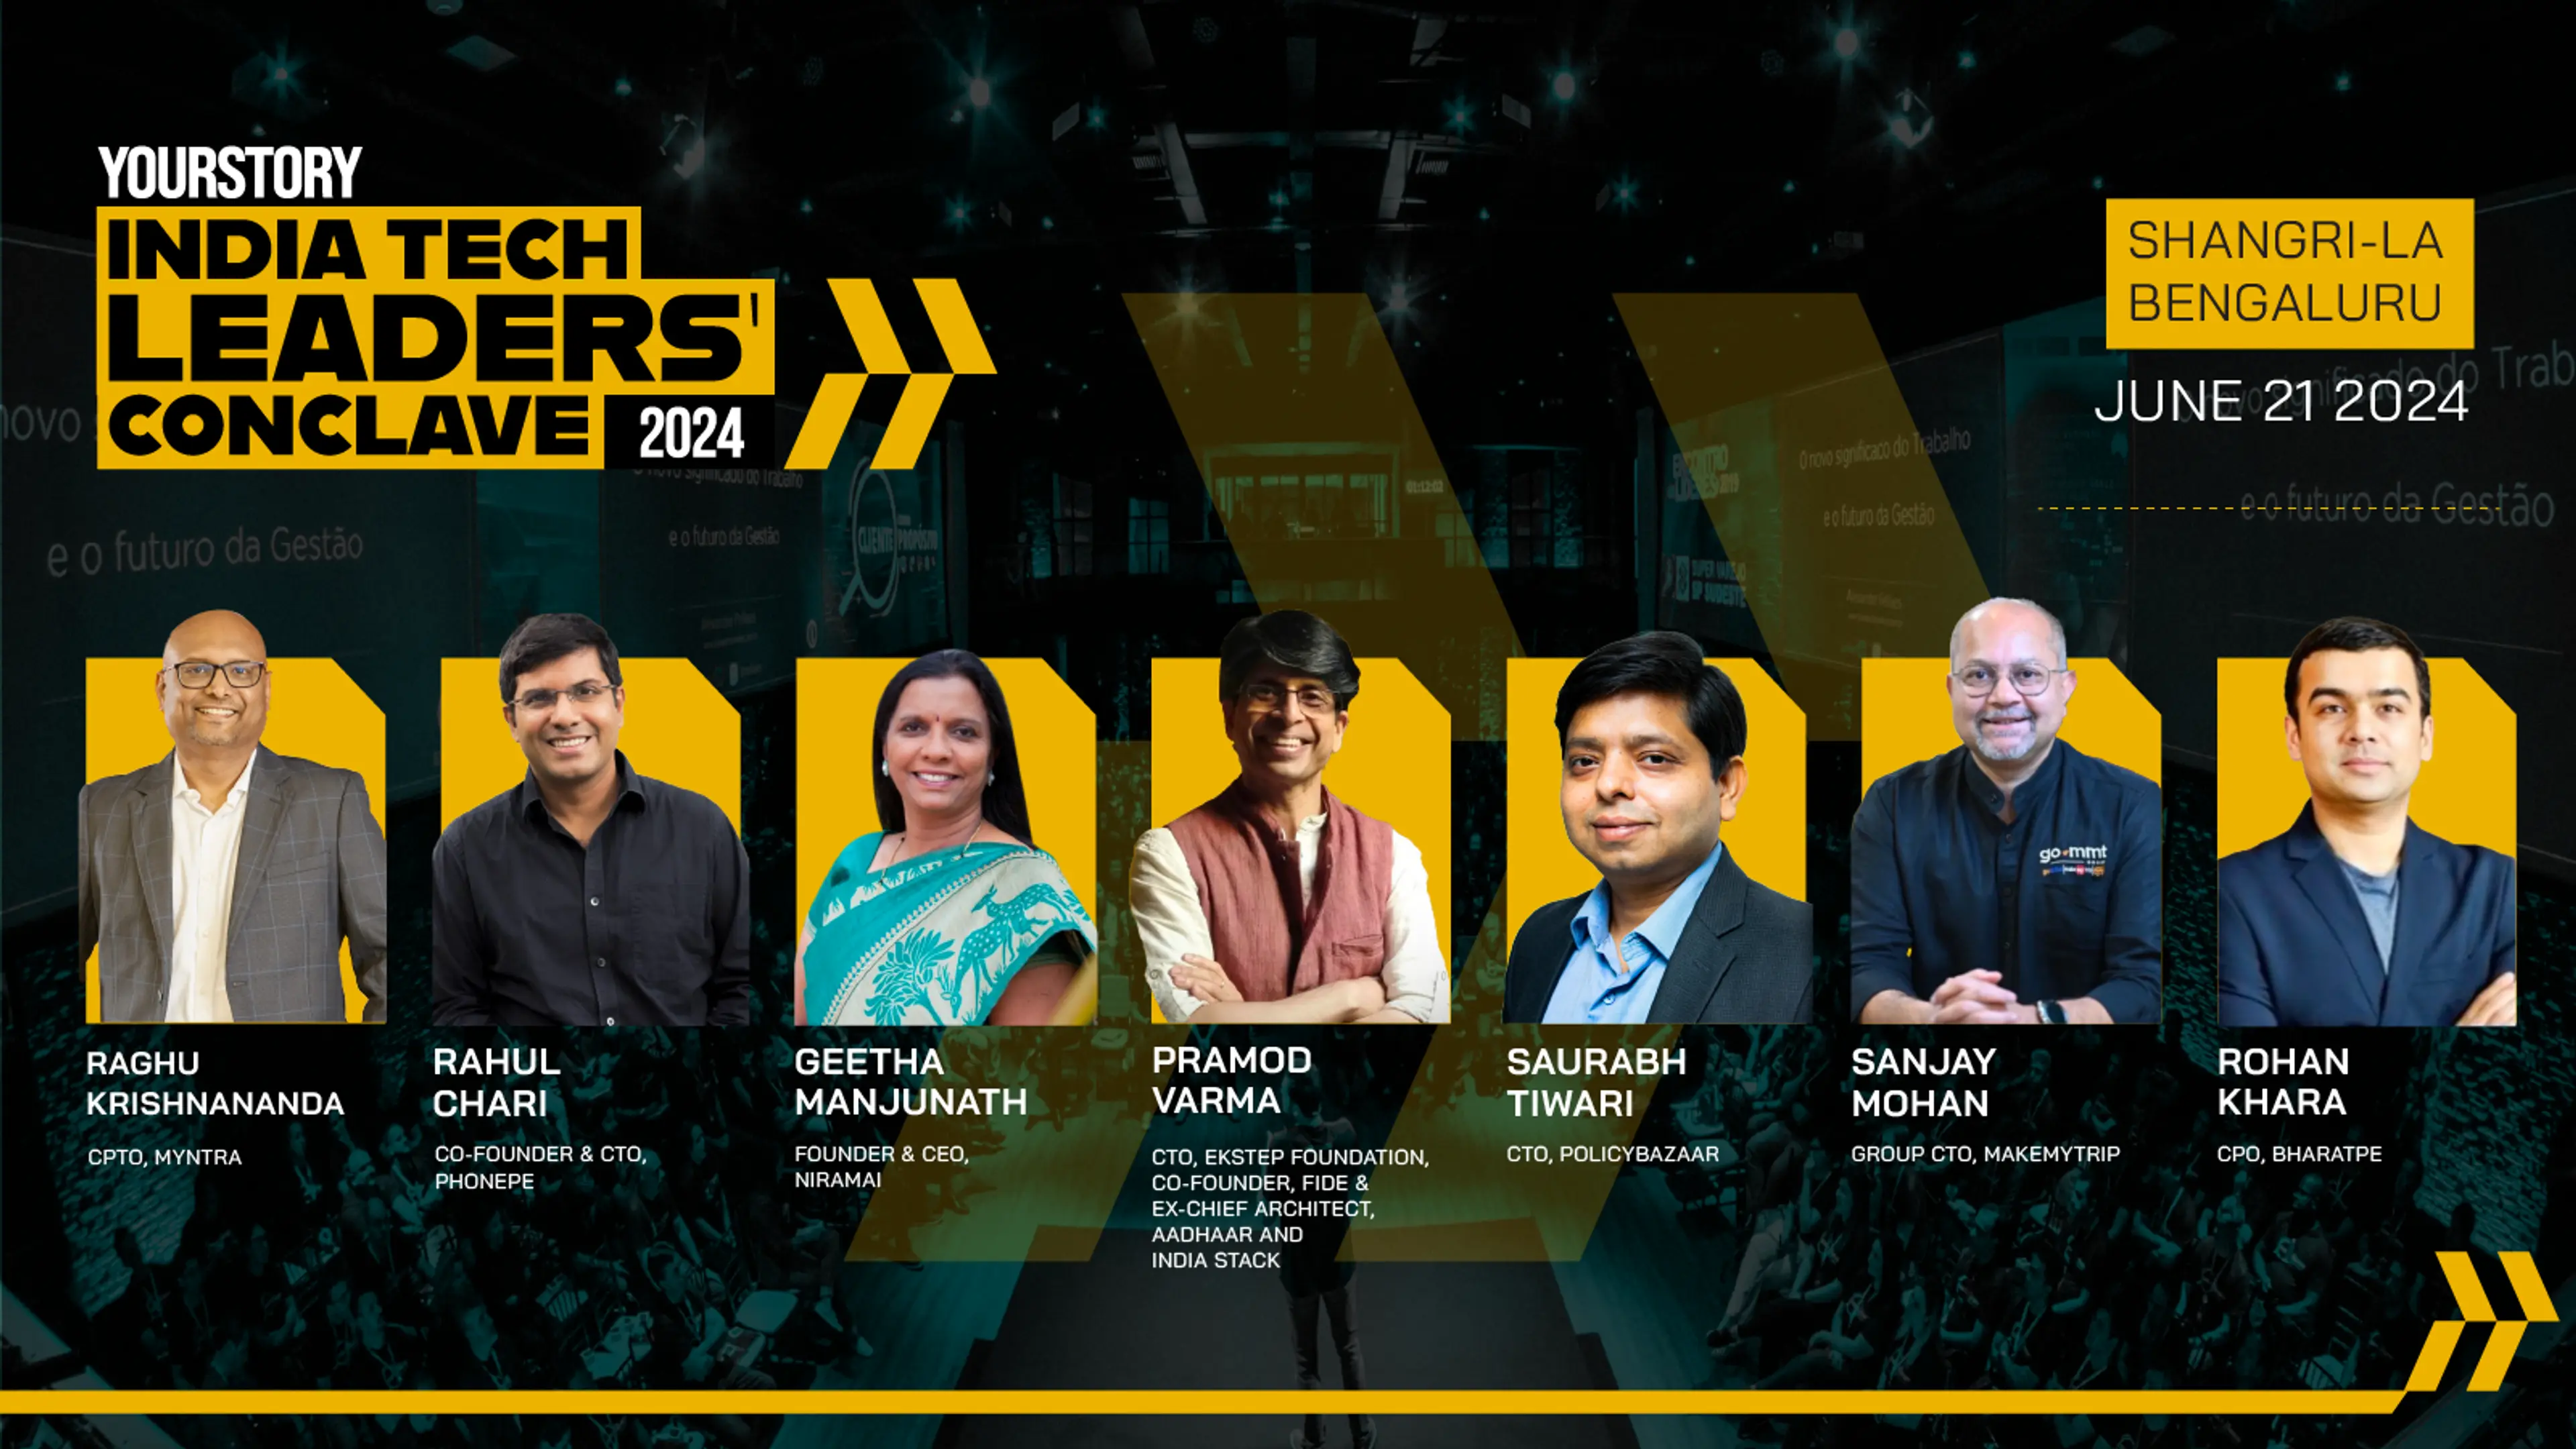 Meet these tech stars at YourStory’s India Tech Leaders Conclave 2024